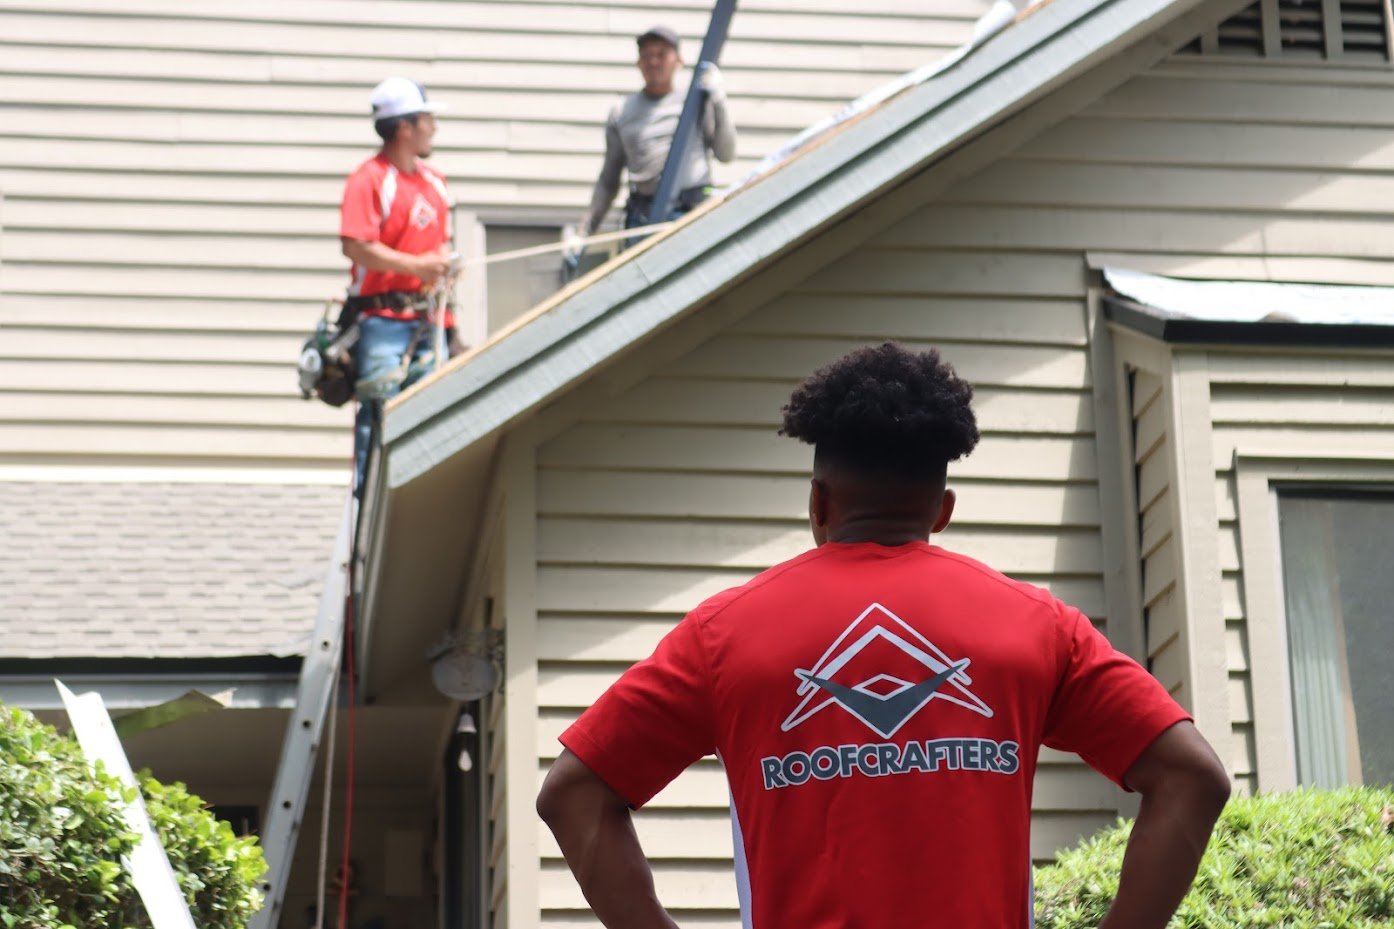 RoofCrafters supervisor inspecting an in-house roofing crews work